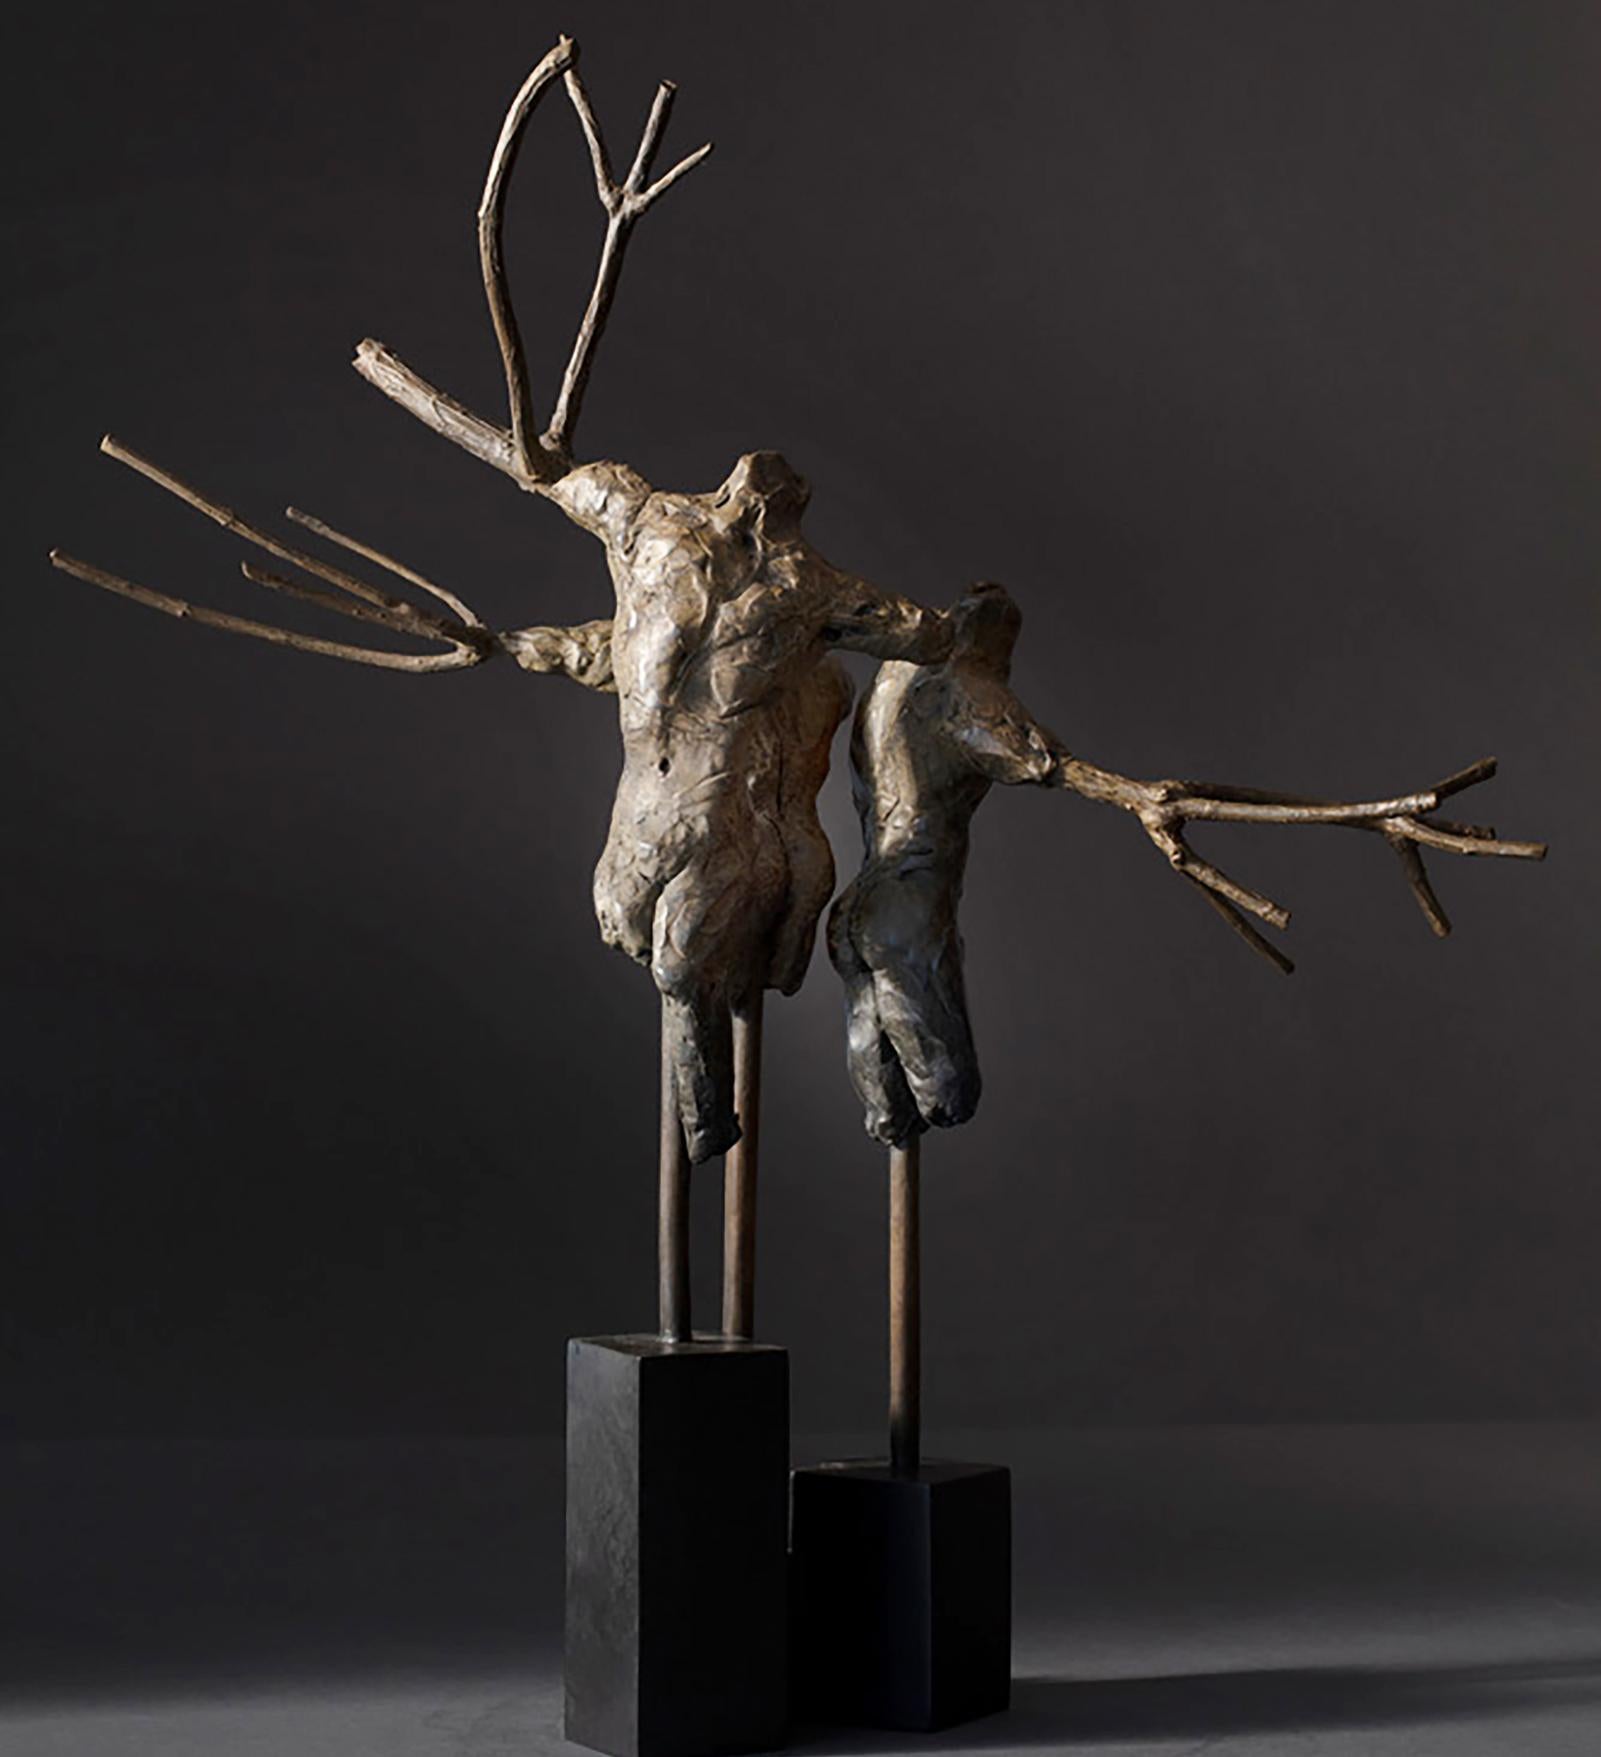 Dances with Trees - Sculpture by Rod Oneglia